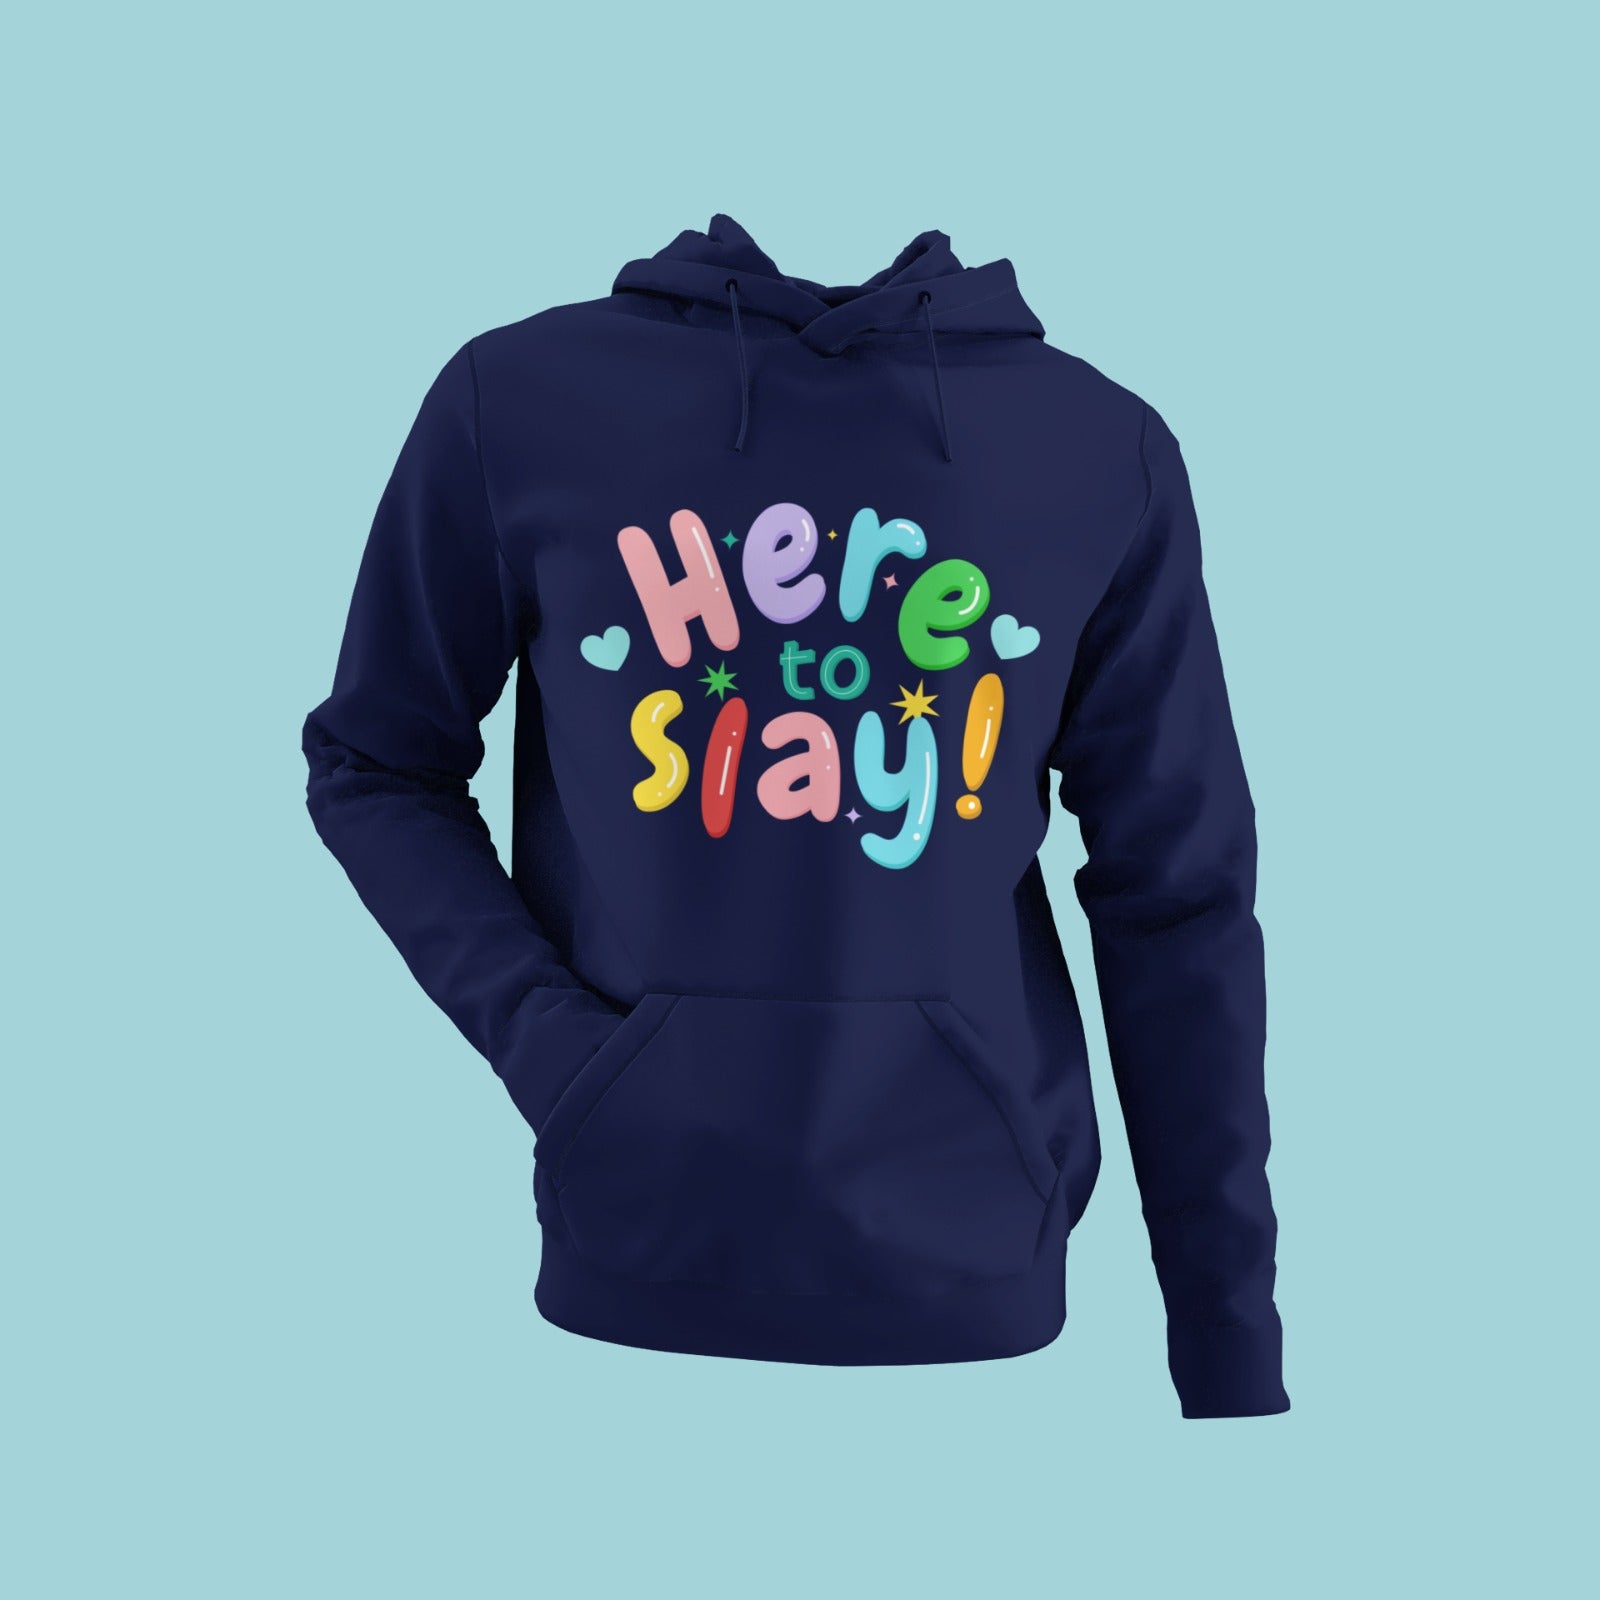 Unleash your inner warrior with our navy blue hoodie featuring a playful 'Here to Slay' slogan. The fun and quirky design is sure to turn heads, while the comfortable fabric ensures you stay cozy all day long. Perfect for those who want to make a statement and show off their unique style!